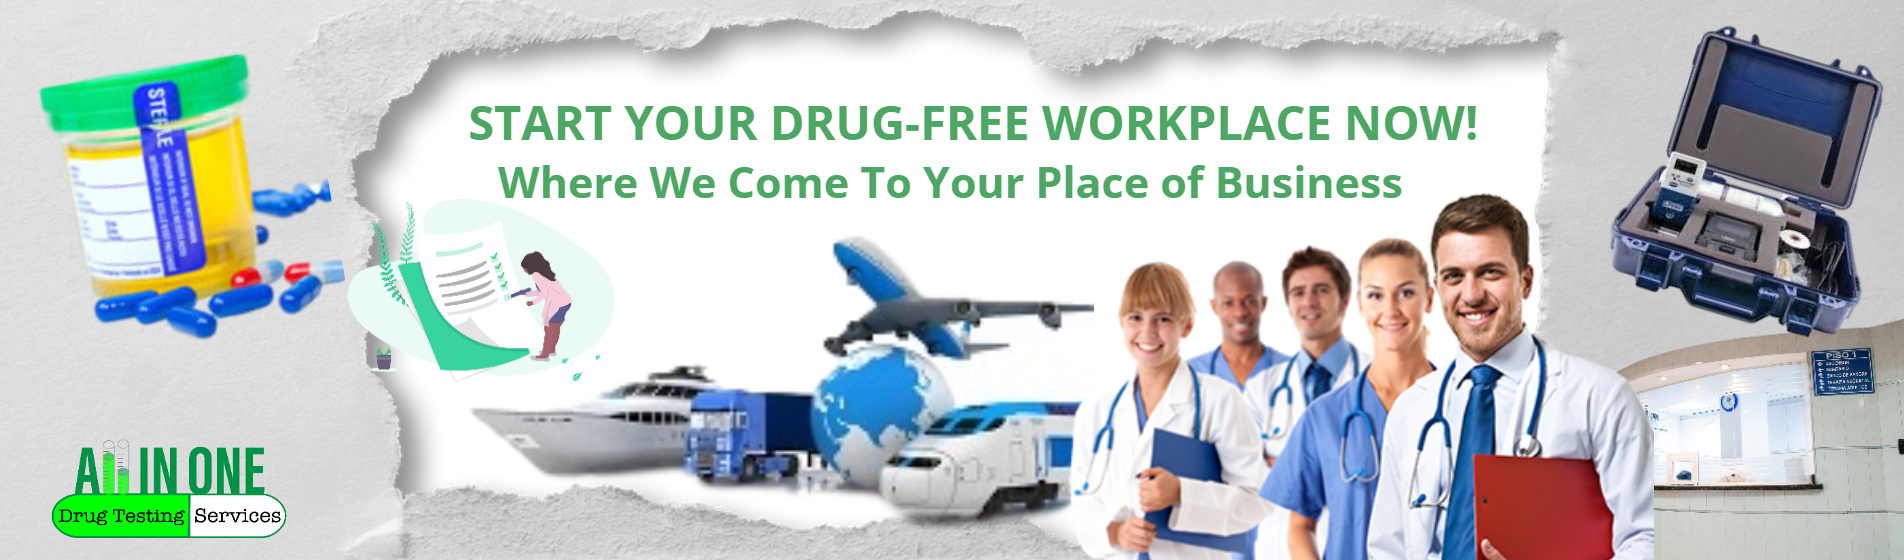 drug free workplace random testing, drug free quotes, drug free workplace program, drug free workplace, drug free workplace act, drug free world, drug free sport, drug free, drug free workplace policy template, random drug testing policy template, random drug testing procedure, drug free workplace policy, can employer drug test without notice, random drug testing probation